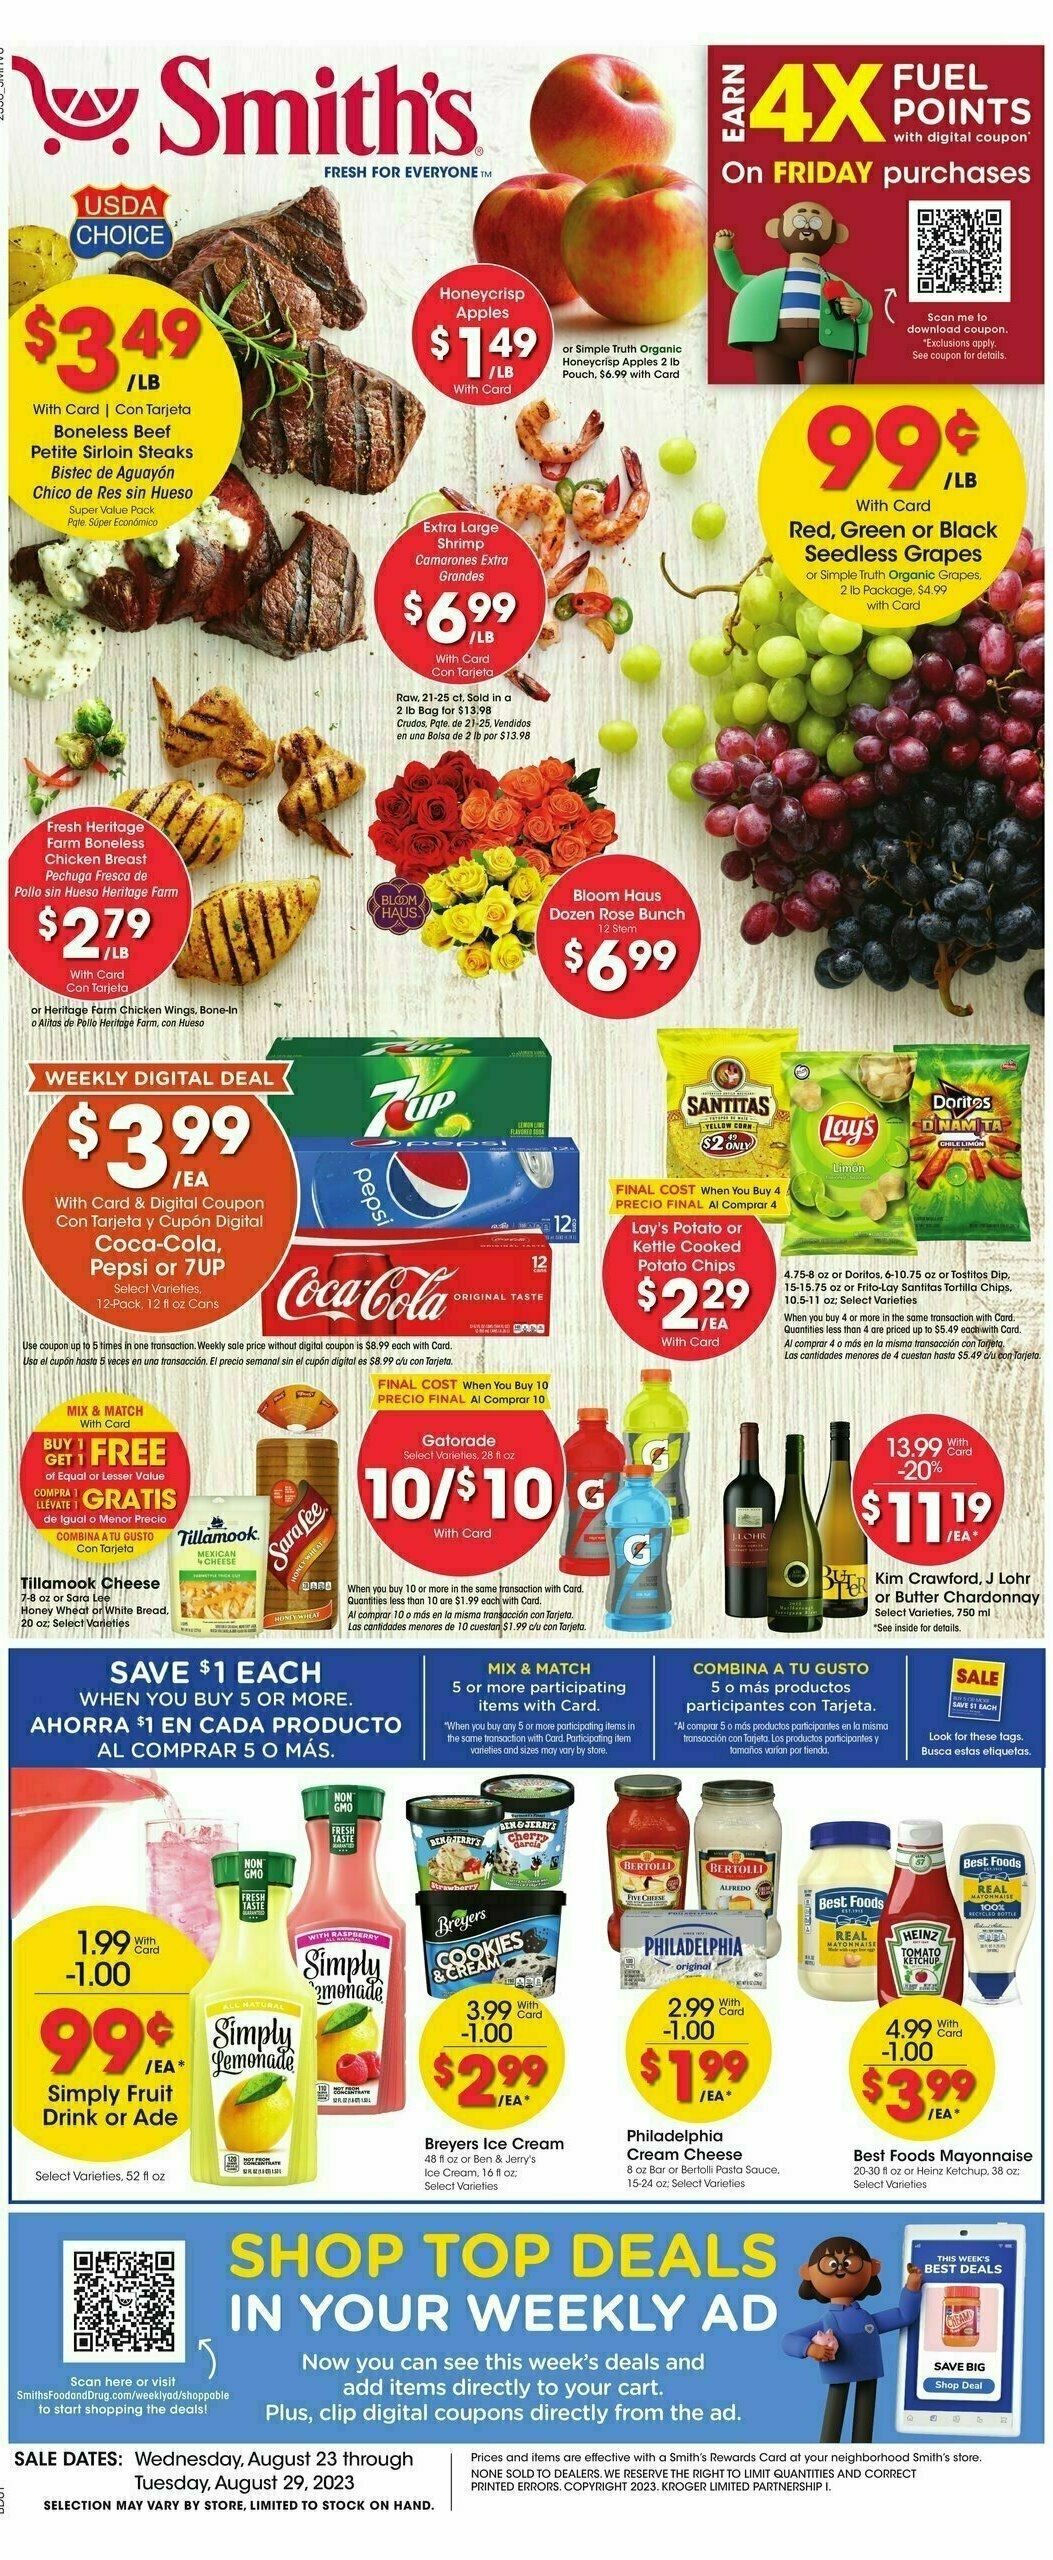 Smith's Weekly Ad from August 23